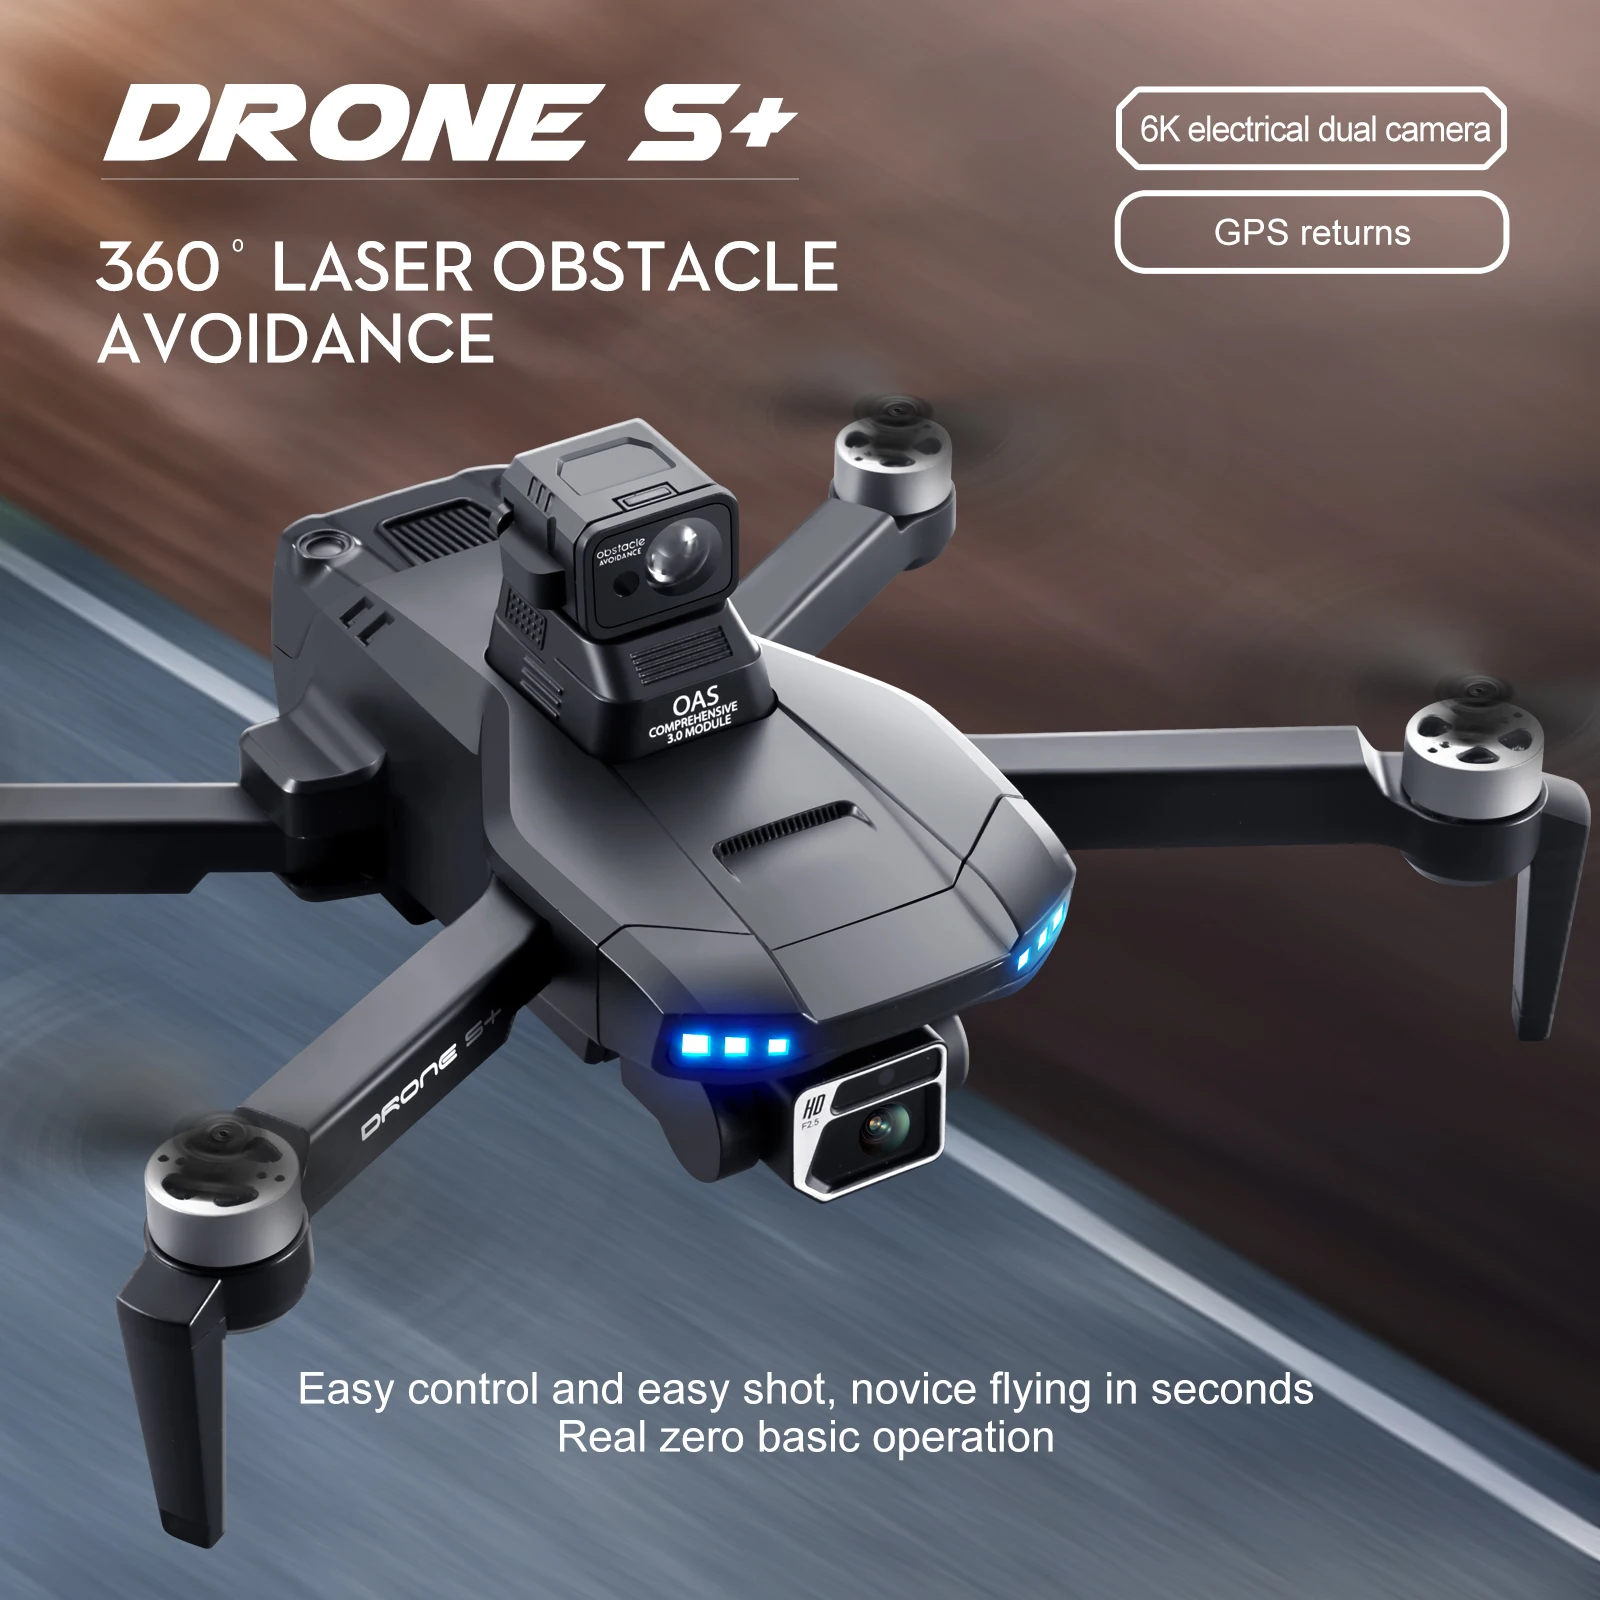 

Drone High-Performance 3000Meters LSRC-S+ GPS 5G WIFI FPV With 6K HD Camera 25mins Flight Time Brushless RC Drone Quadcopter